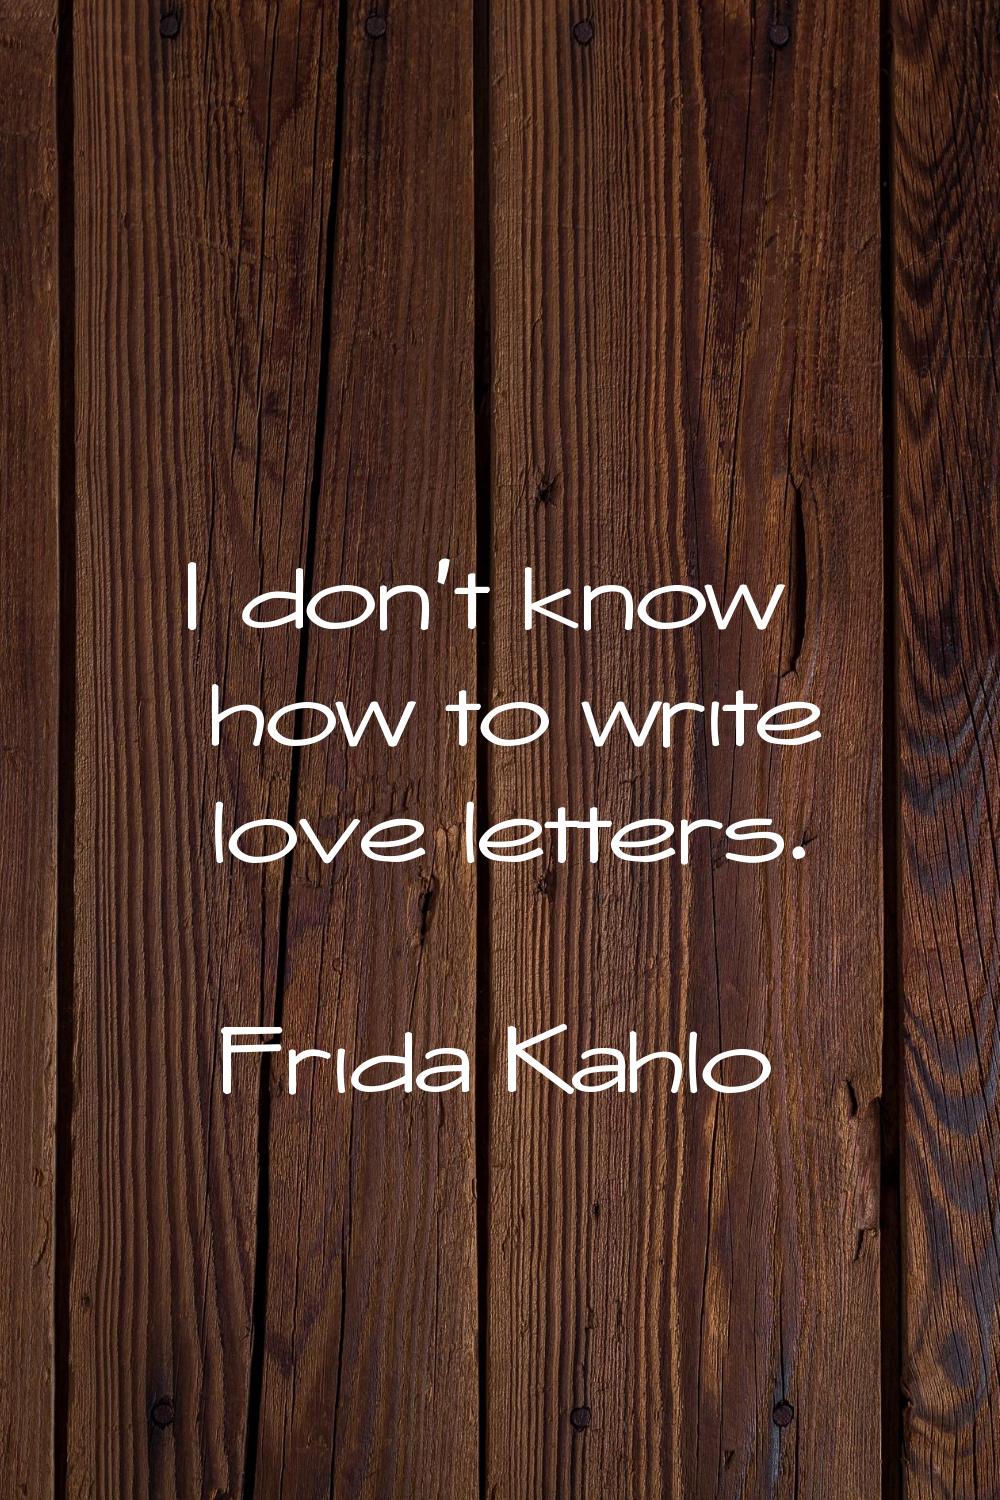 I don't know how to write love letters.